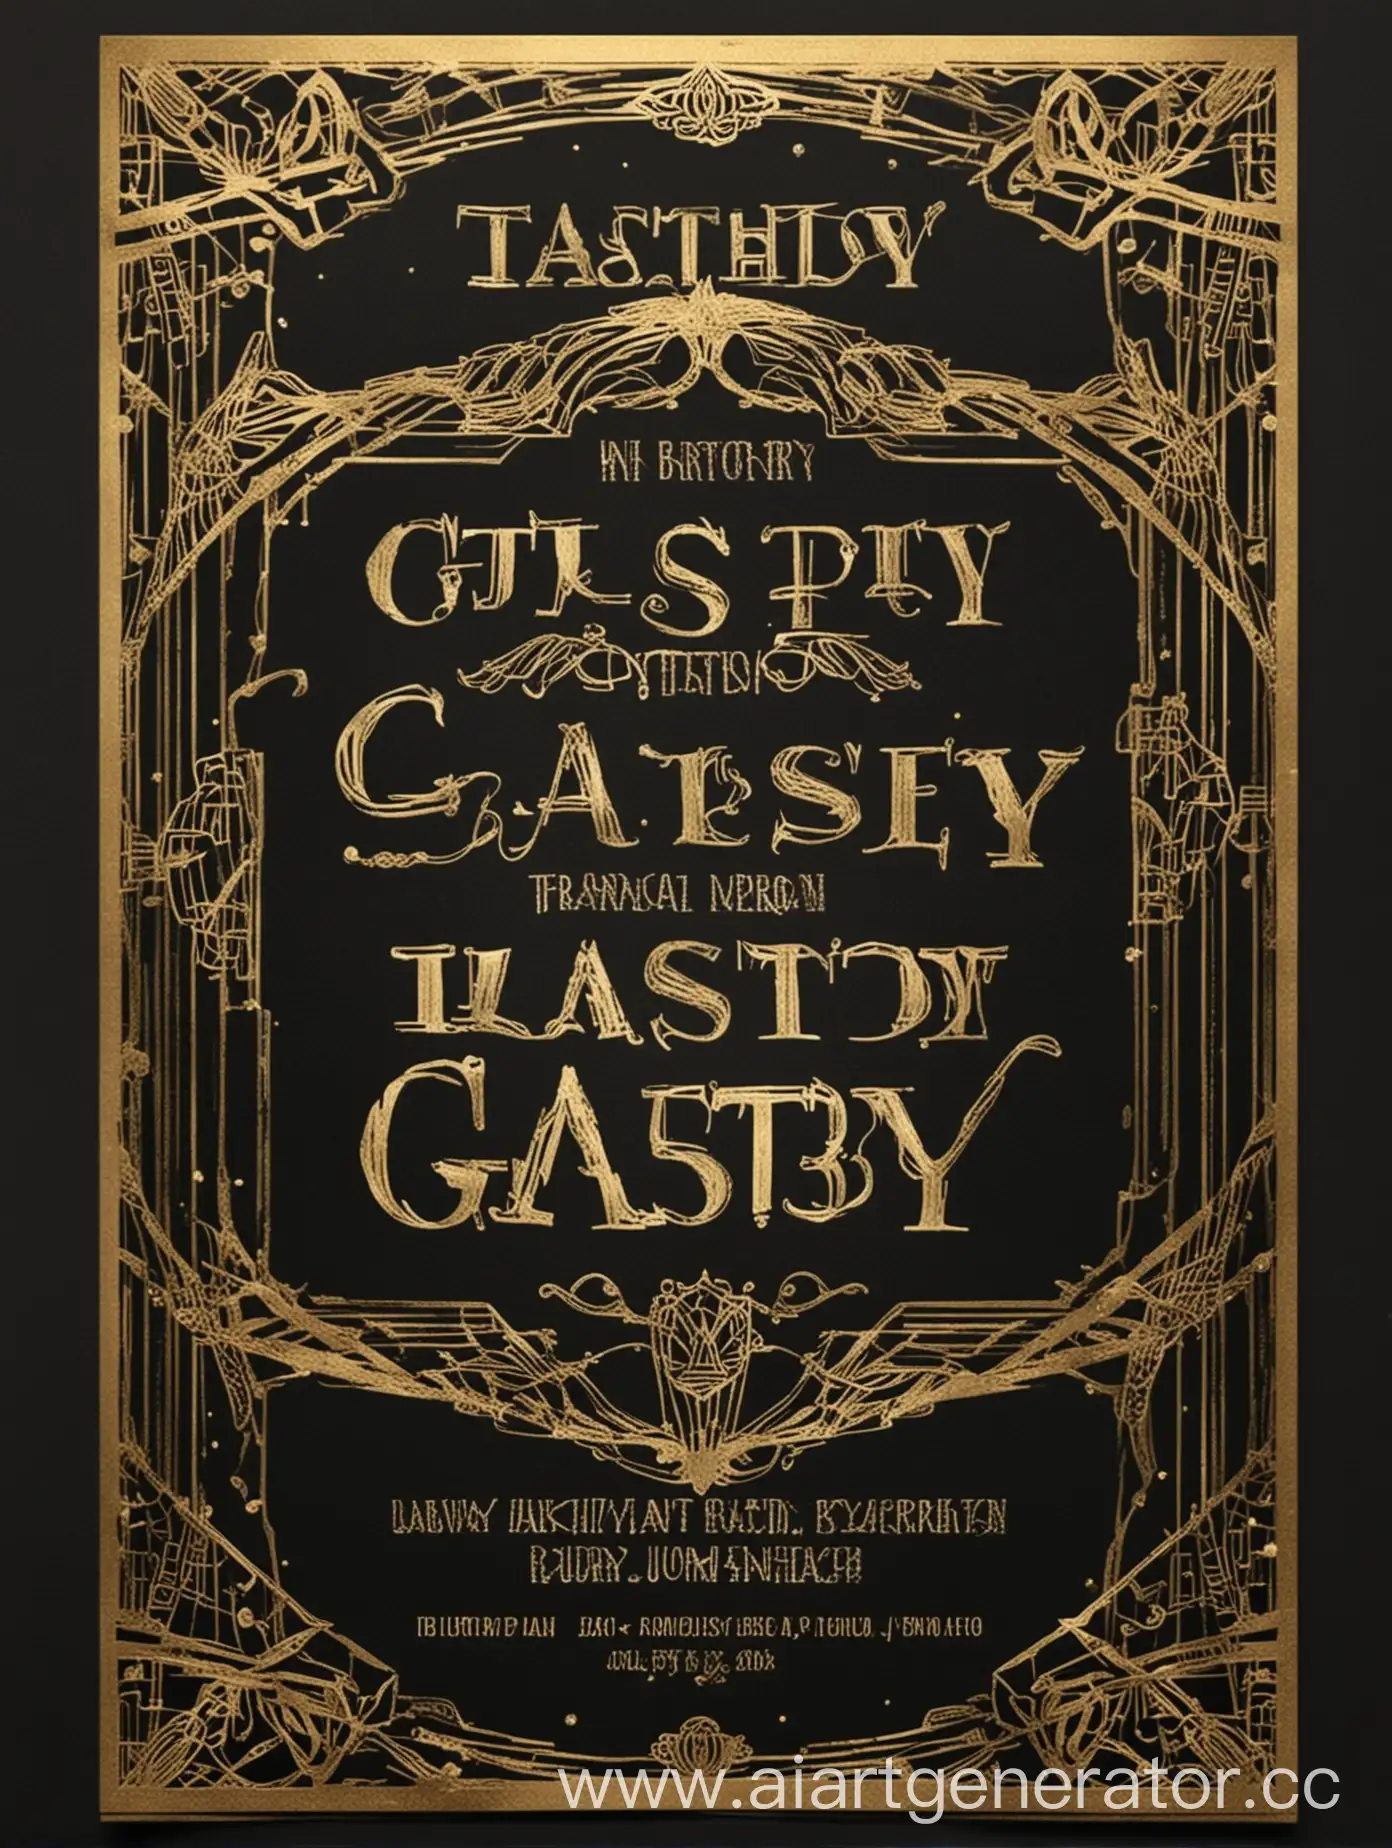 Elegant-Gatsby-Themed-Party-Invitation-Template-with-Art-Deco-Design